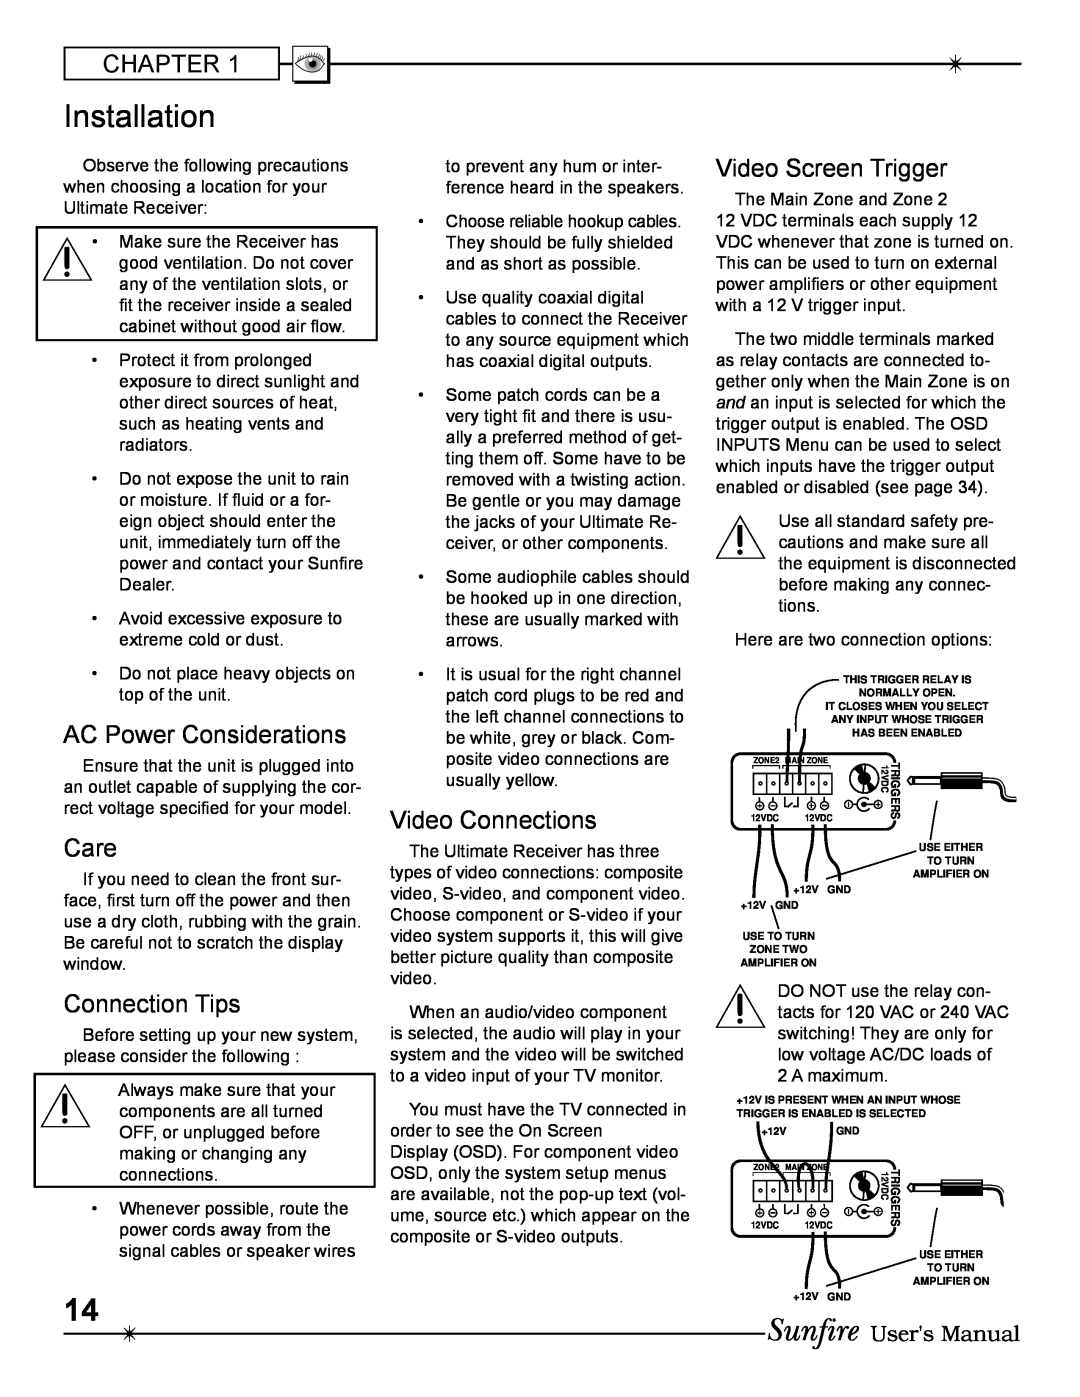 Sunfire Radio manual Installation, Chapter, AC Power Considerations, Care, Connection Tips, Video Connections 